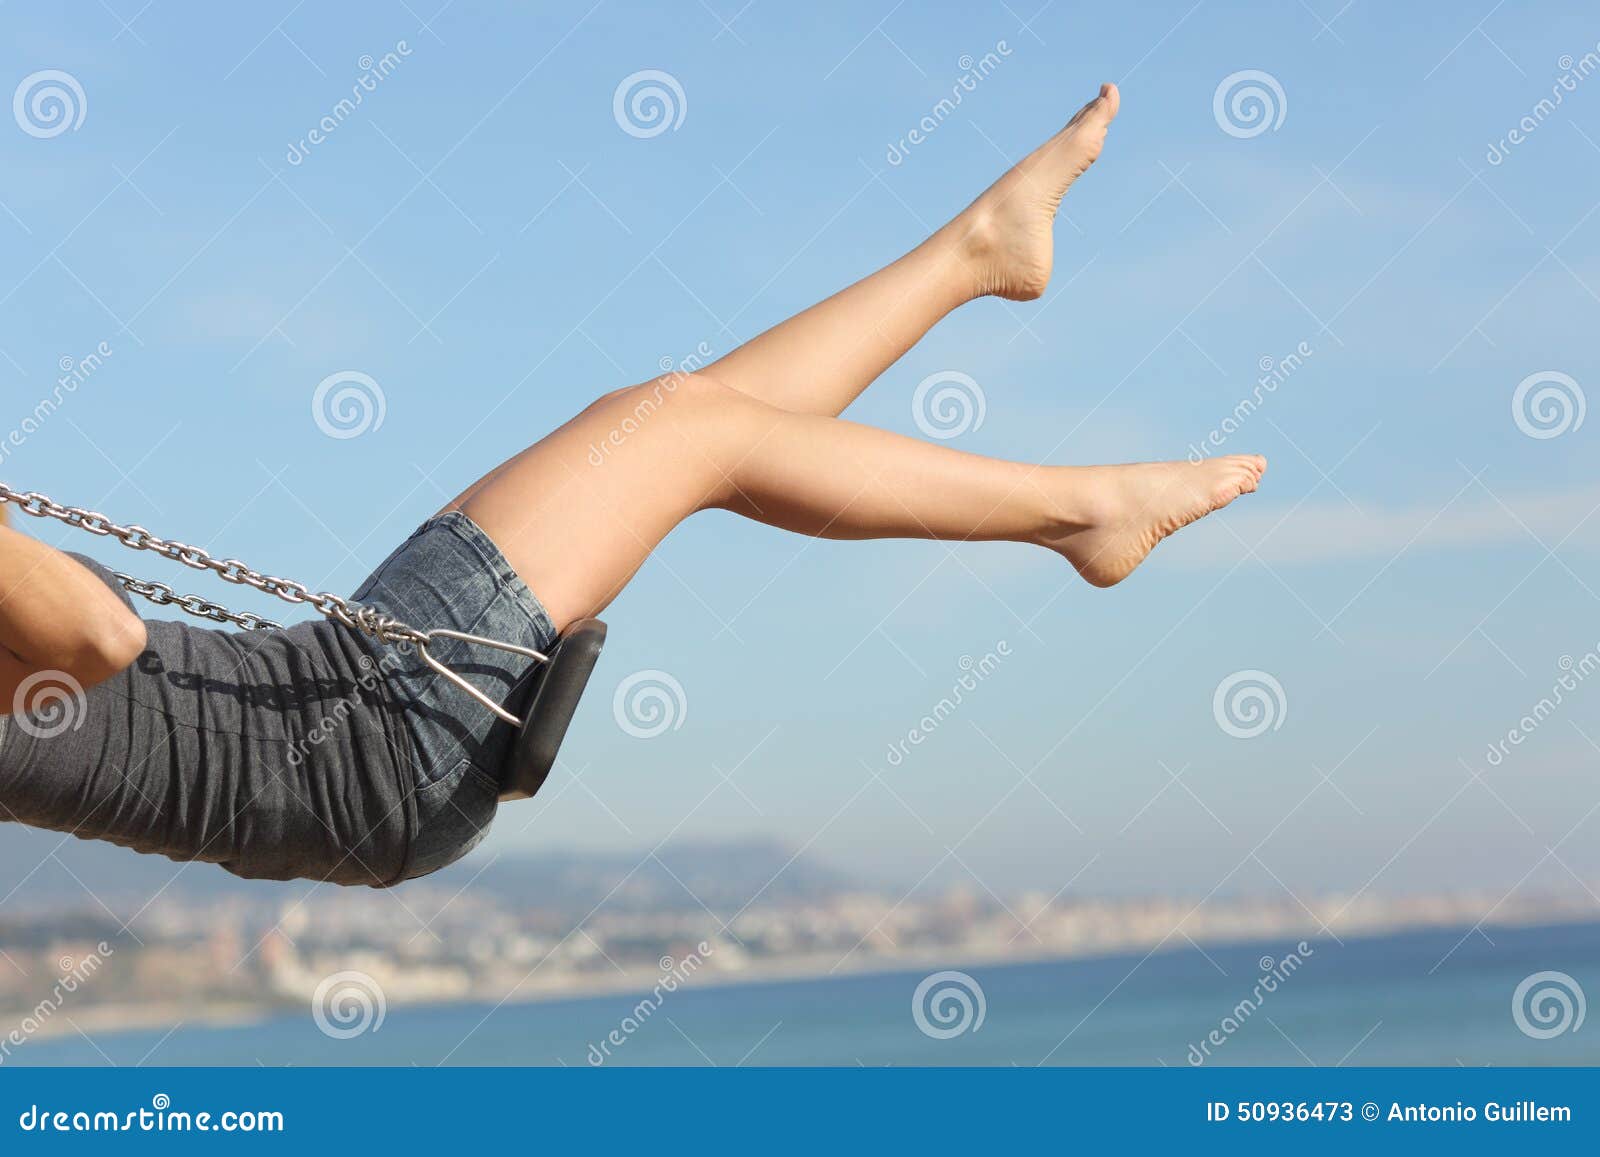 hair removed woman legs swinging on the beach